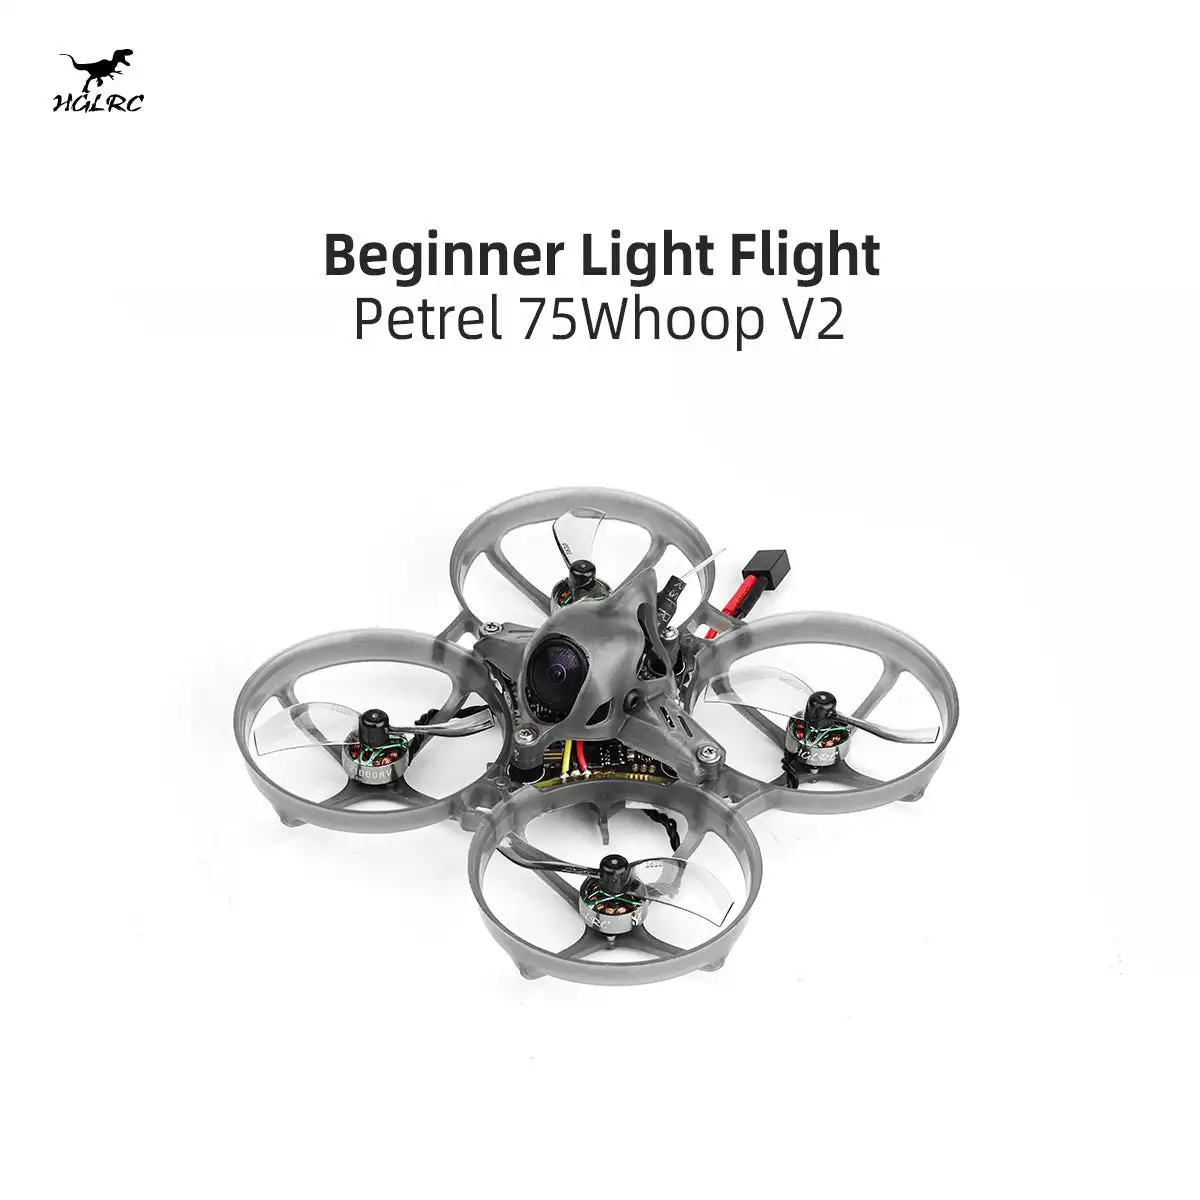 

HGLRC Petrel 75Whoop V2 Brushless Motor Indoor FPV Drone Tinywhoop Quadcopter SPECTER 10A AIO 0802 21000KV for FPV Beginner